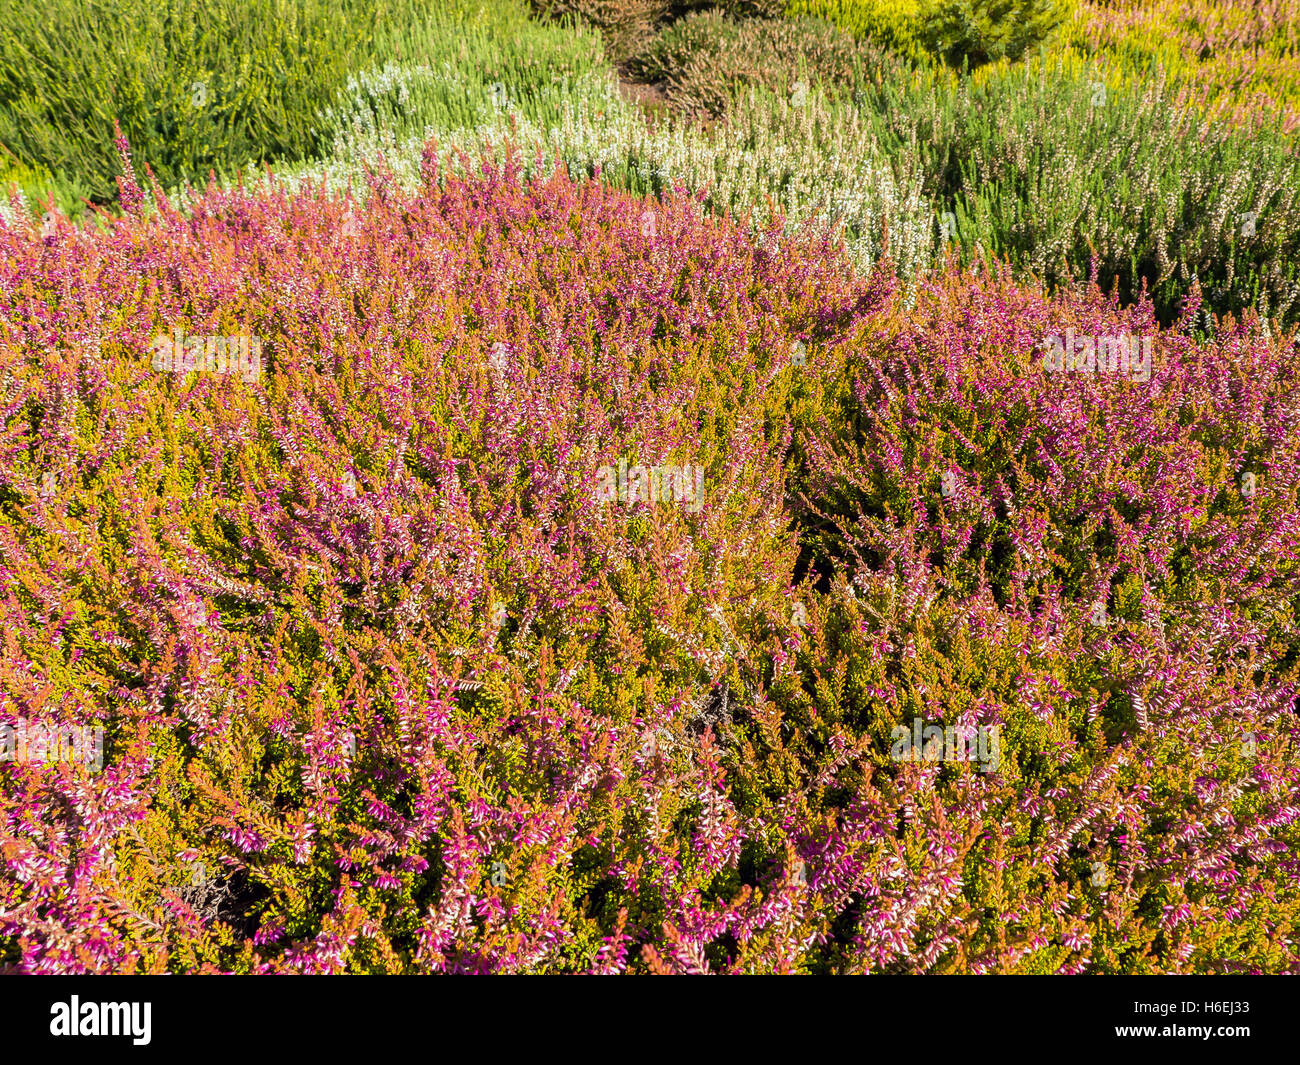 Field of colorful heather flowers Stock Photo